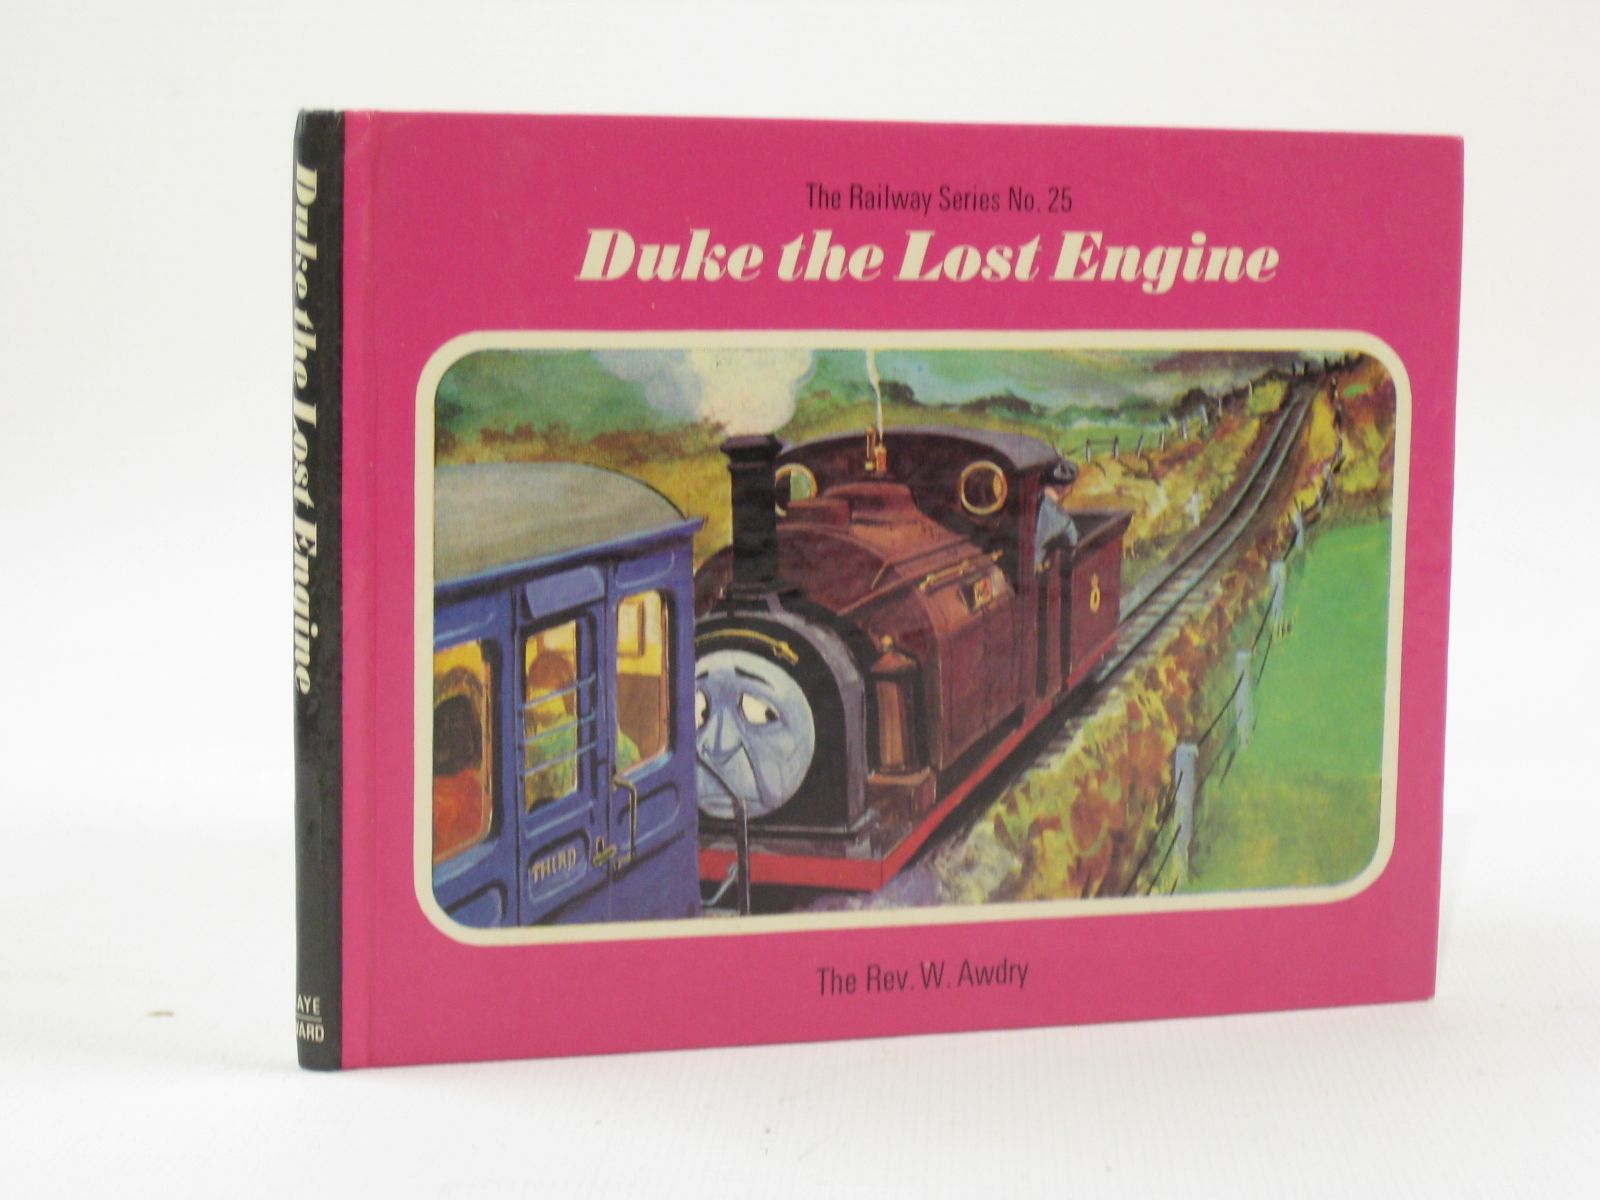 Cover of DUKE THE LOST ENGINE by Rev. W. Awdry